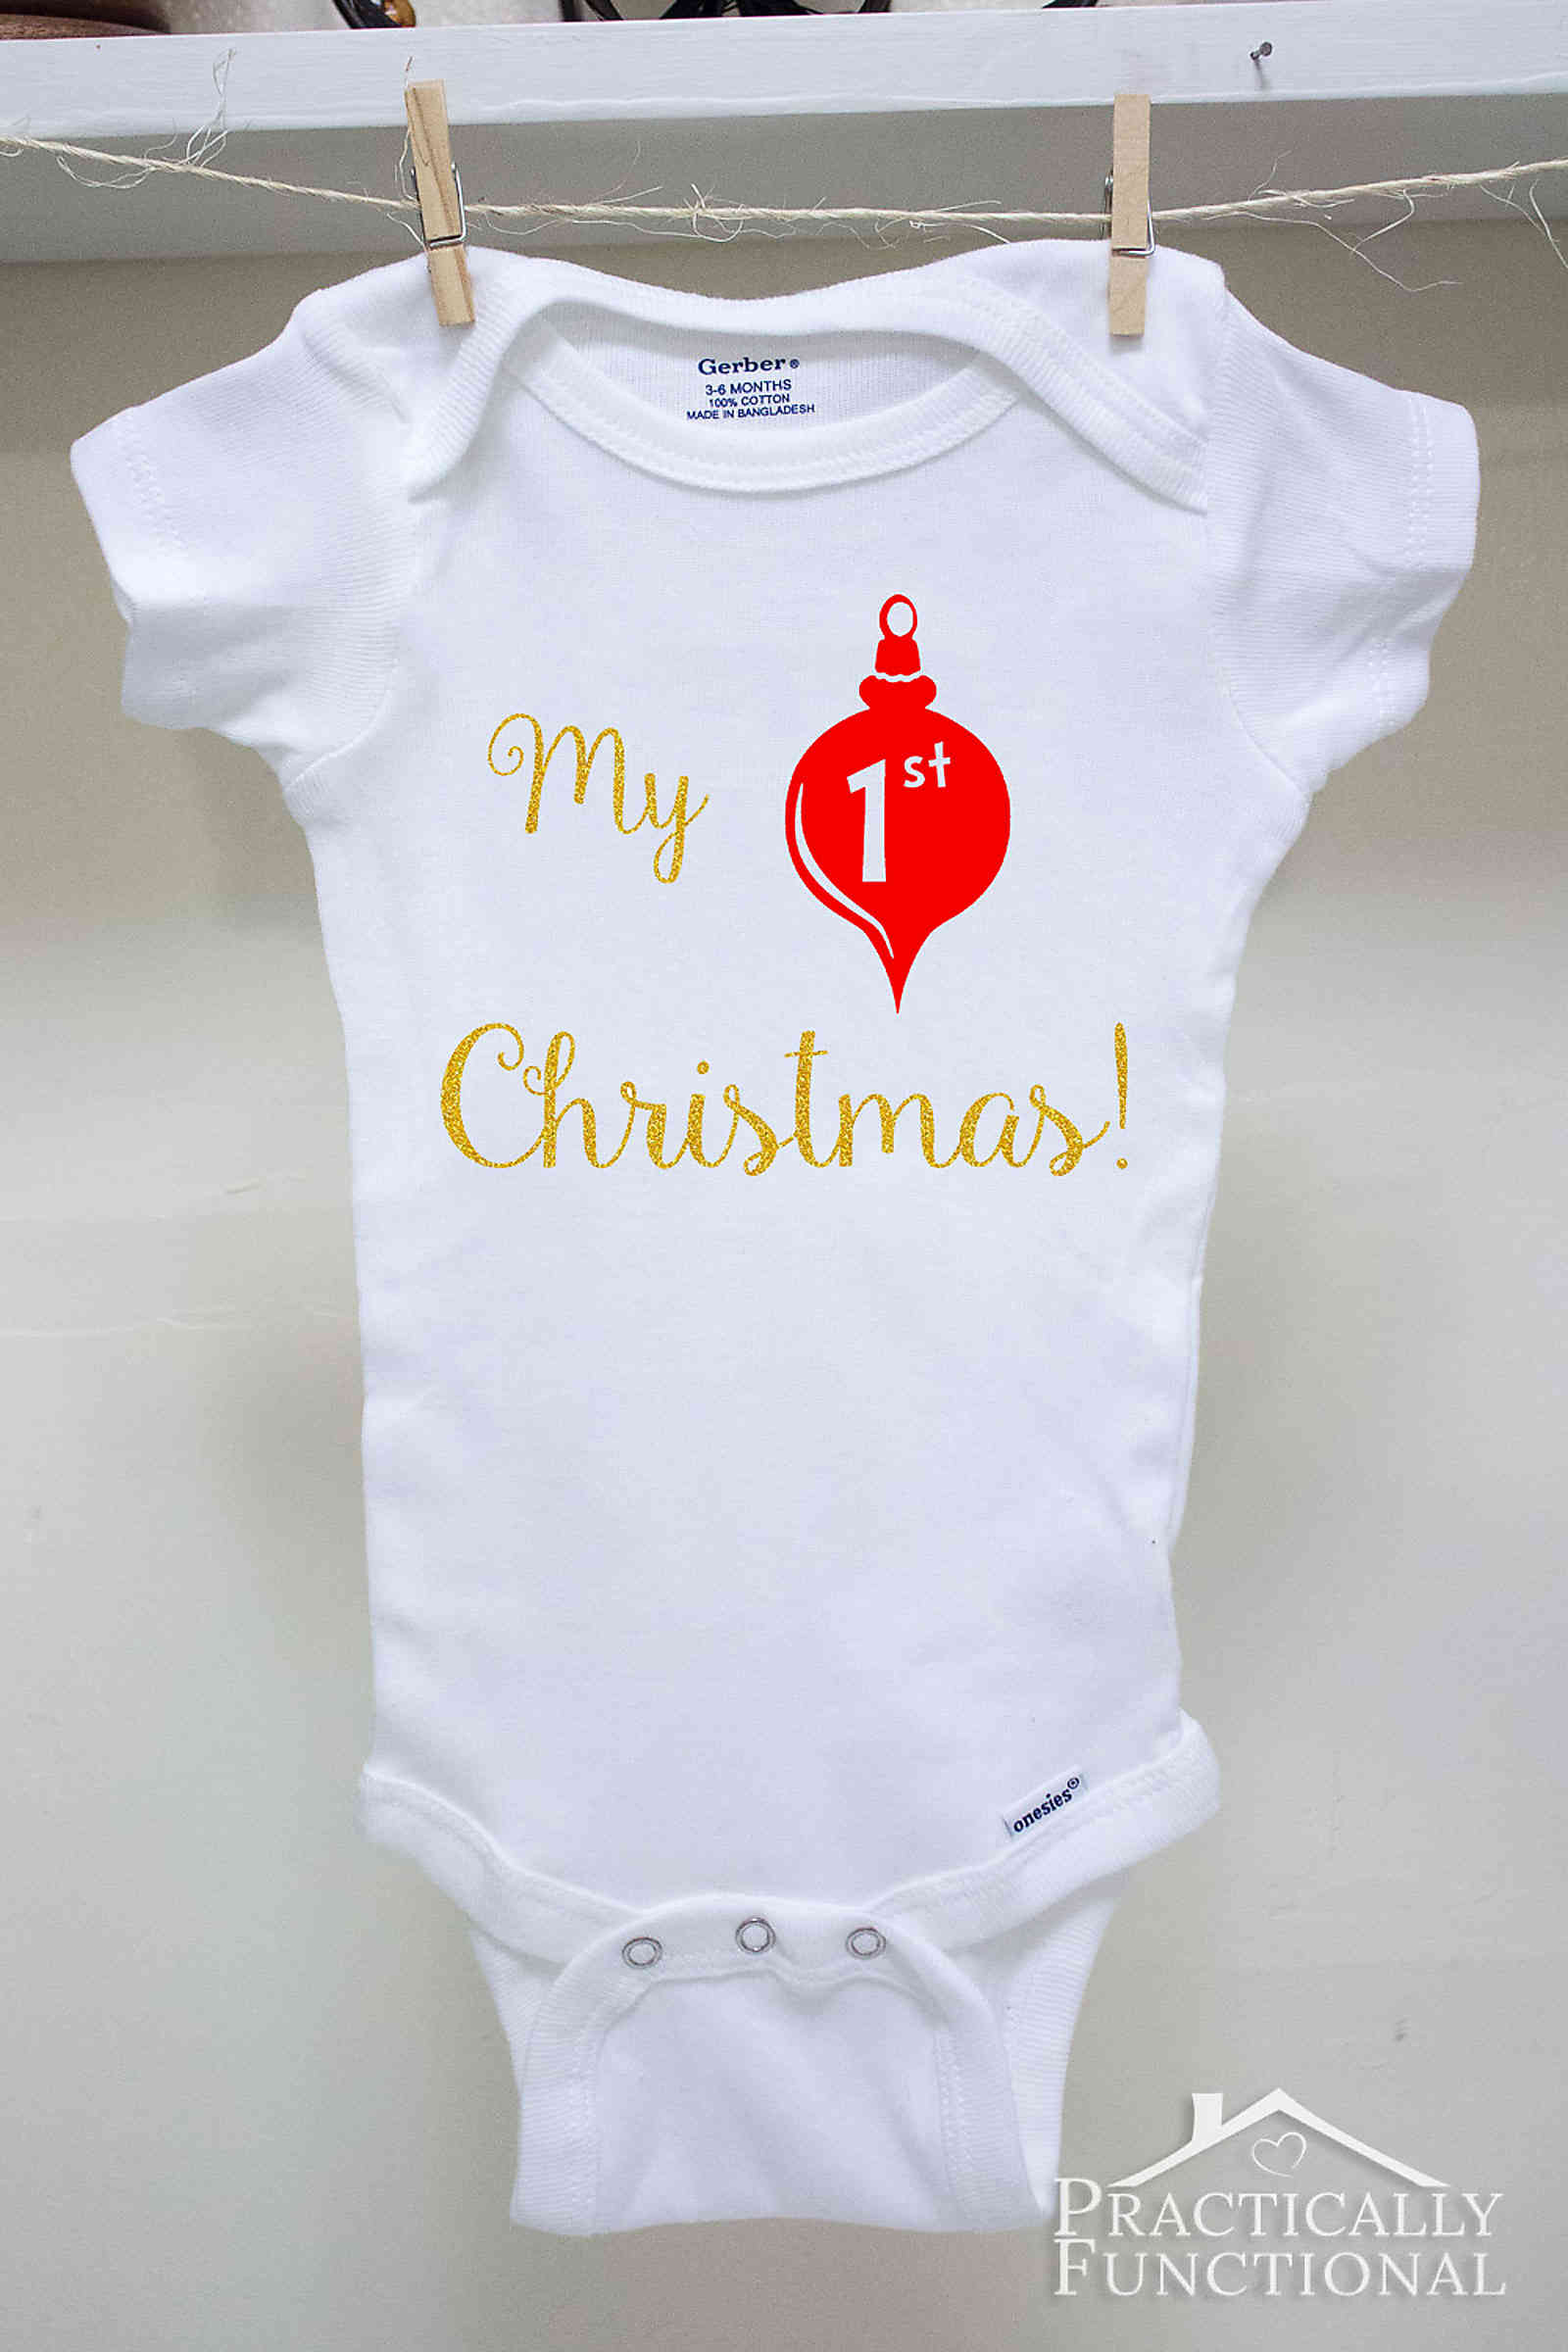 This My 1st Christmas onesie is such a great idea for a handmade gift for a baby shower or Christmas!